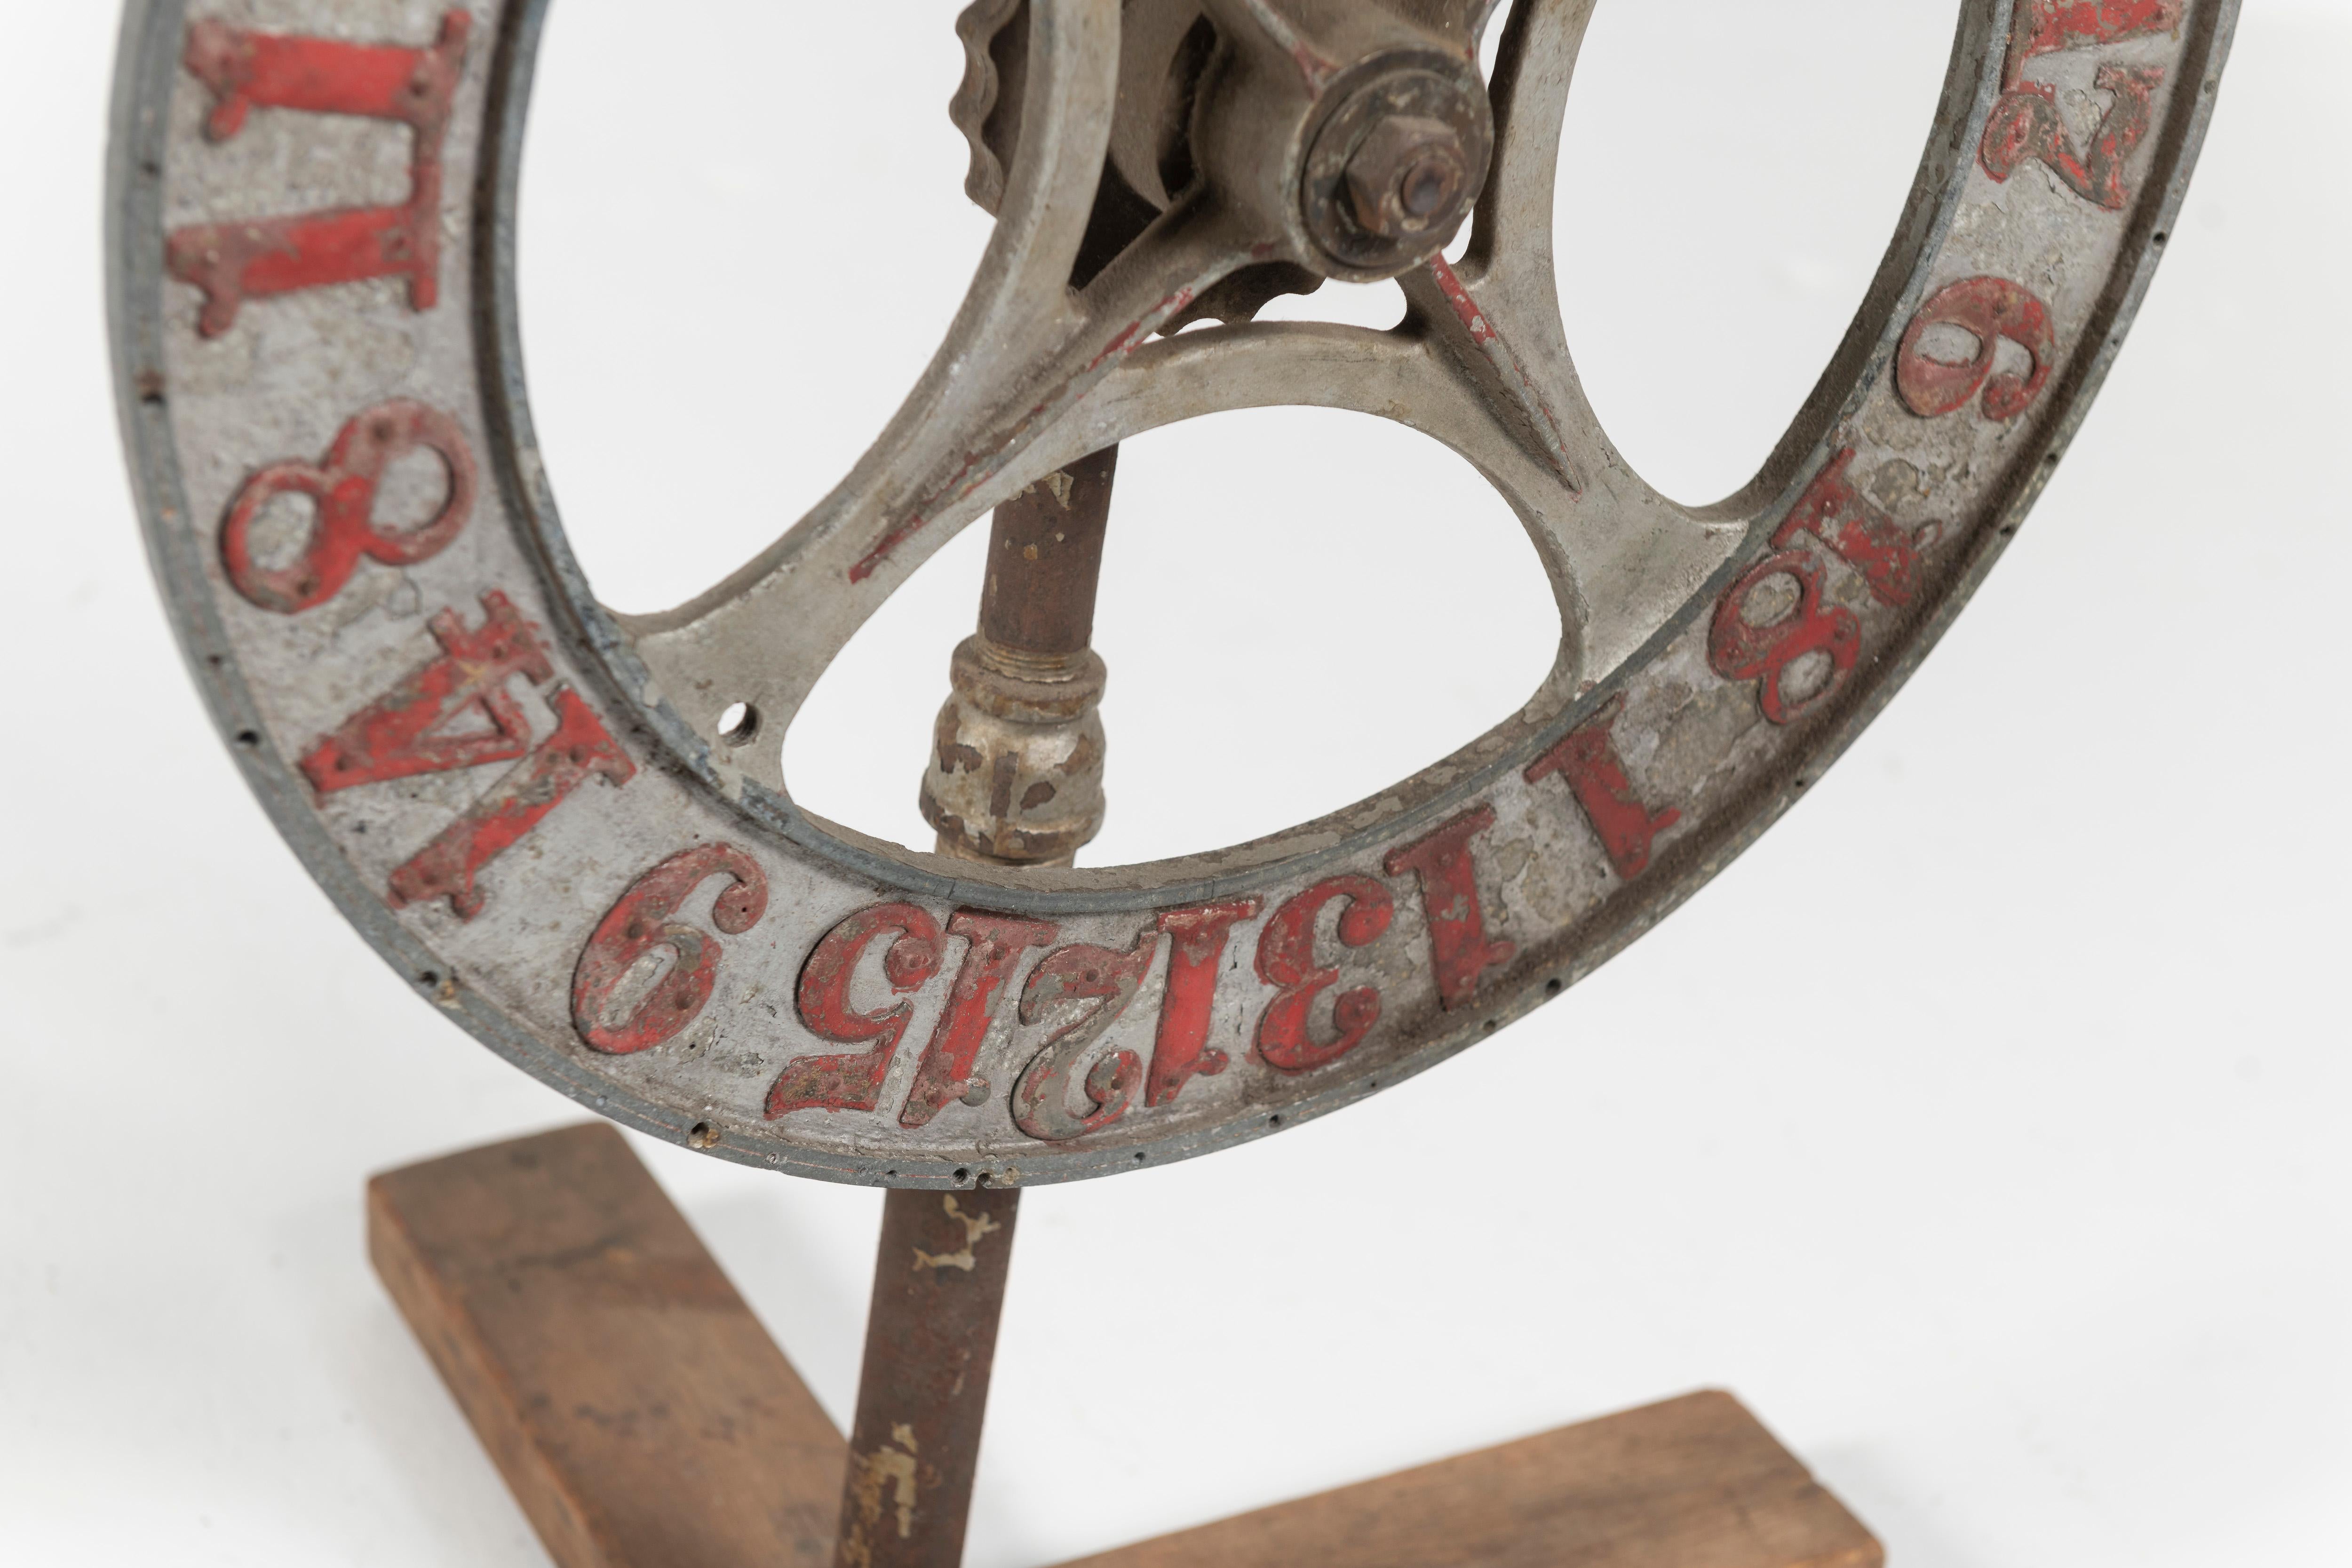 Roulette originated in France and was brought to the United States, specifically New Orleans,  in the late 18th Century. This antique metal gaming wheel with red painted number, is a great addition to your casino room or prop for your upcoming film